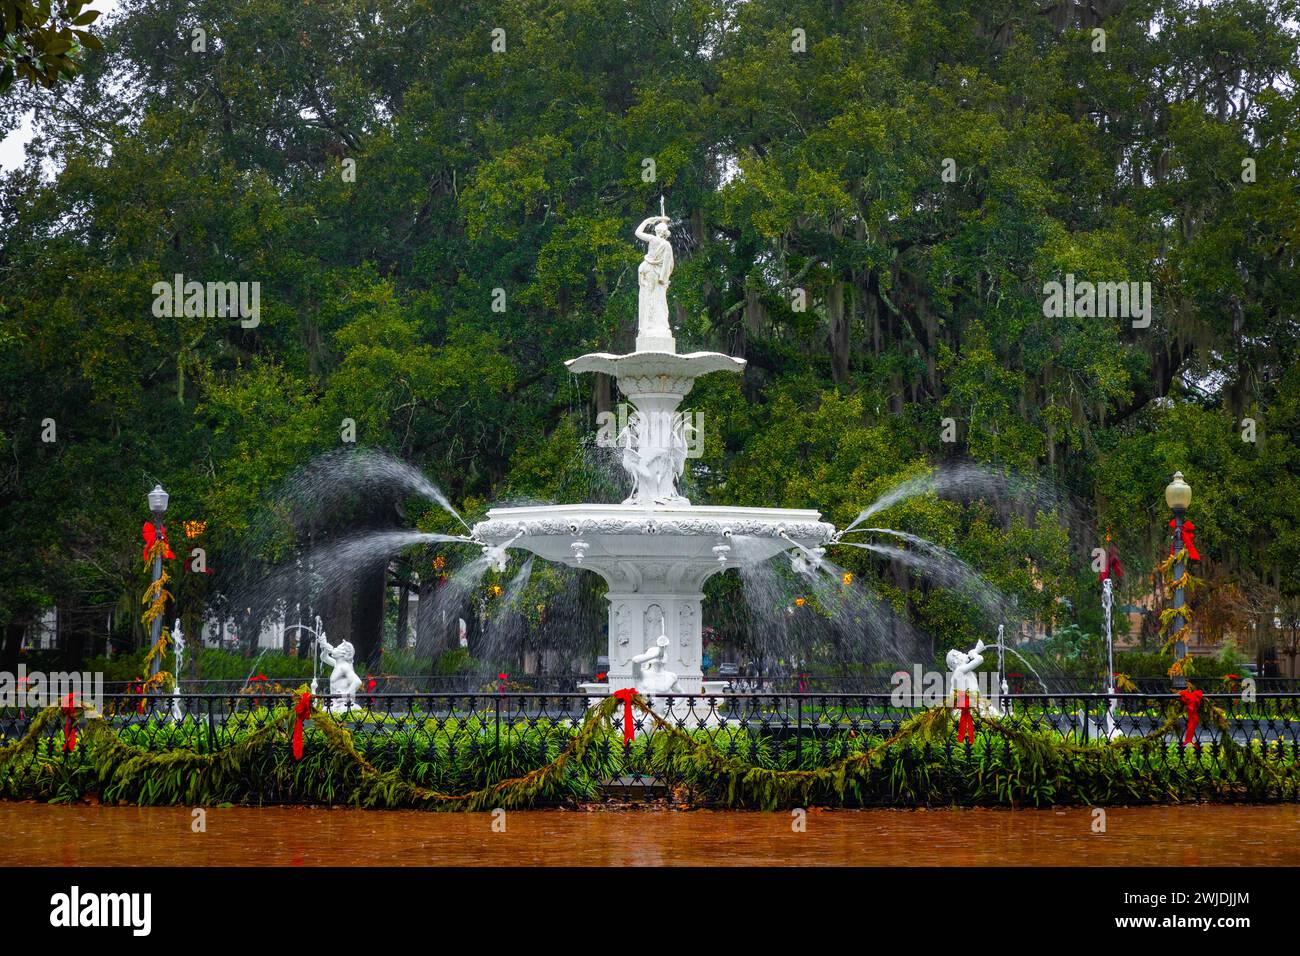 Beautiful vintage fountain at Forsyth Park in Savannah Georgia local attraction Stock Photo